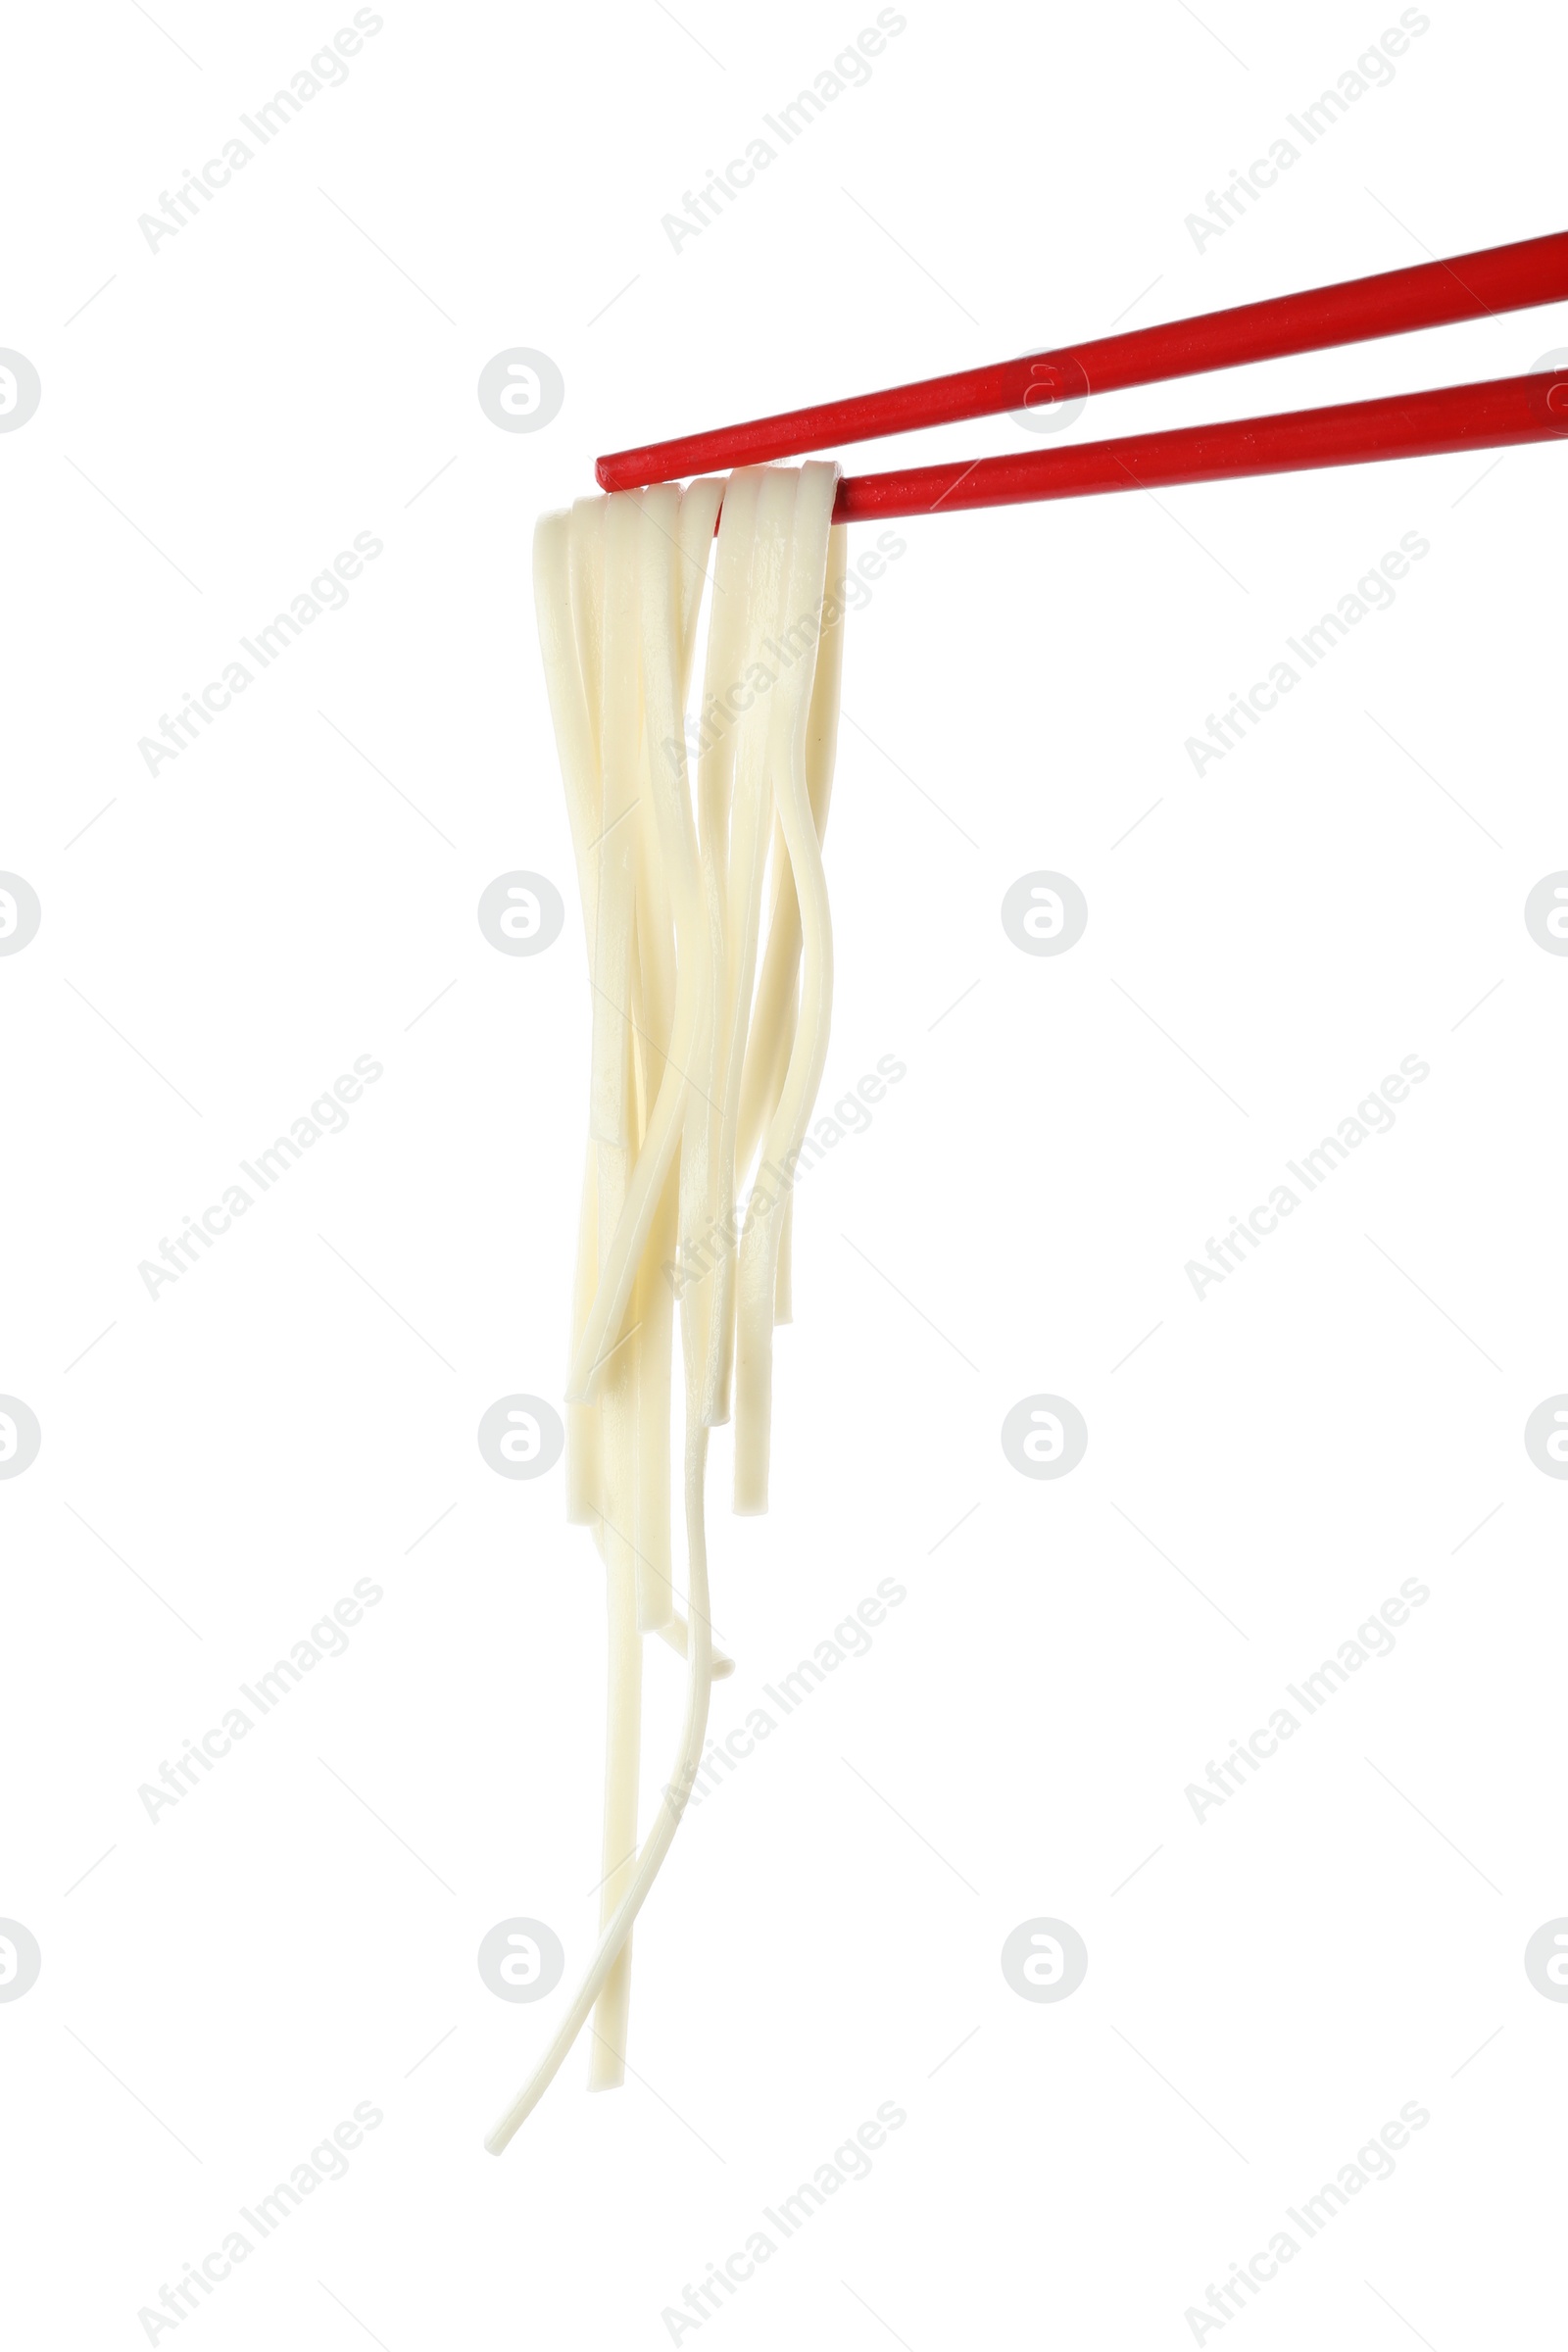 Photo of Chopsticks with tasty cooked rice noodles isolated on white